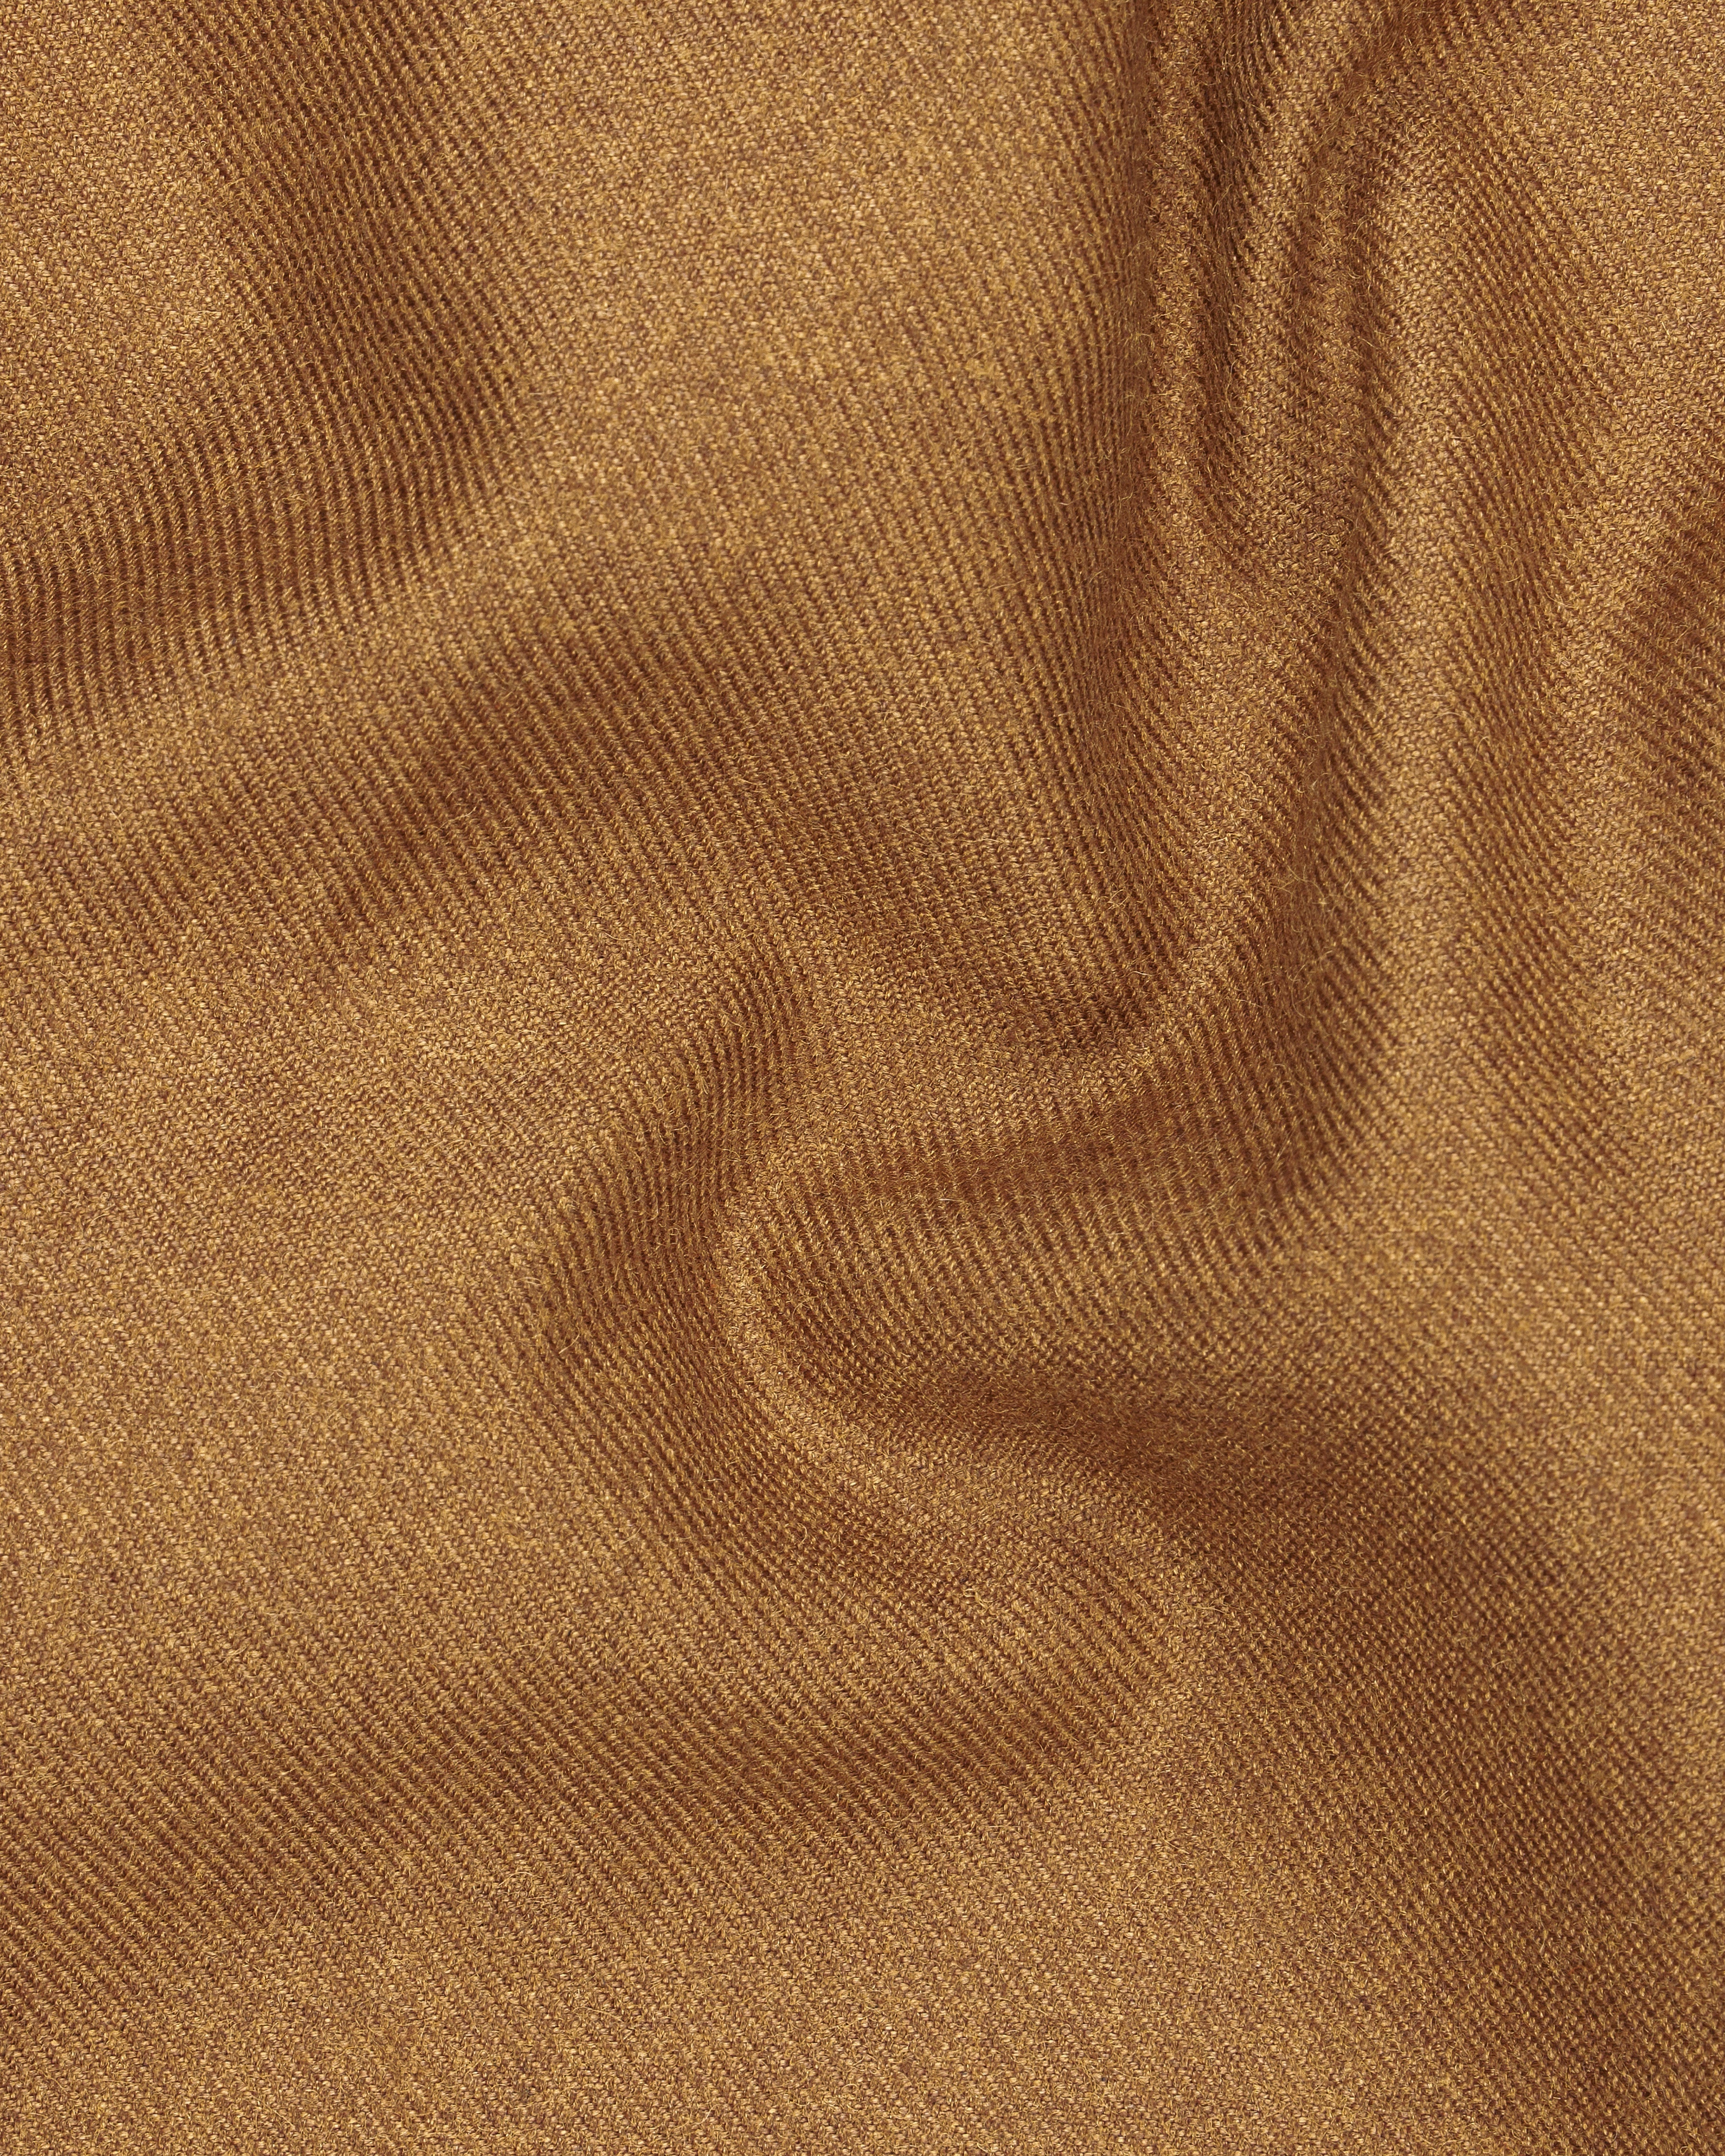 Cape Palliser Brown Wool Rich Double Breasted Trench Coat,TCB2530-DB-D35-36, TCB2530-DB-D35-38, TCB2530-DB-D35-40, TCB2530-DB-D35-42, TCB2530-DB-D35-44, TCB2530-DB-D35-46, TCB2530-DB-D35-48, TCB2530-DB-D35-50, TCB2530-DB-D35-53, TCB2530-DB-D35-54, TCB2530-DB-D35-56, TCB2530-DB-D35-58, TCB2530-DB-D35-60